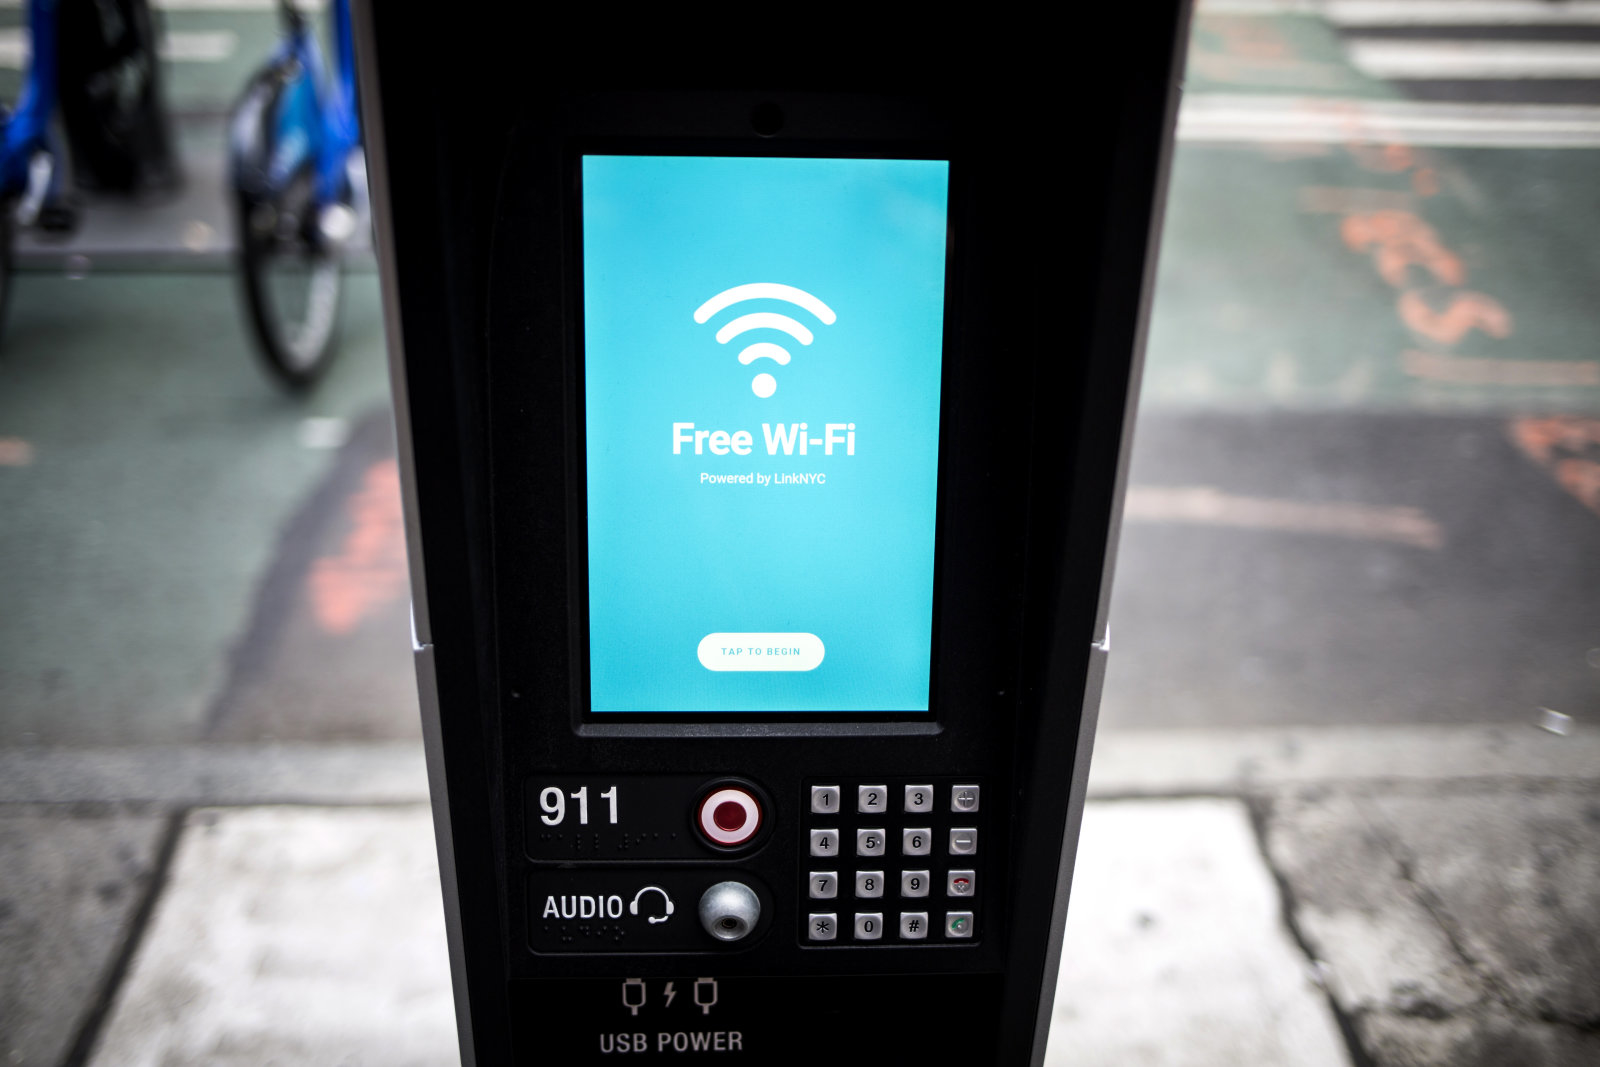 A LinkNYC kiosk stands in the Times Square neighborhood of New York, U.S., on Friday, Sept. 16, 2016. New York City's experiment to let people browse the internet from public terminals on city streets has ended, at least for now. On Wednesday, the operator of the terminals said it was removing their web browsing capabilities, saying people were monopolizing the kiosks and using them to look at content that wasn't appropriate for public viewing. Photographer: John Taggart/Bloomberg via Getty Images